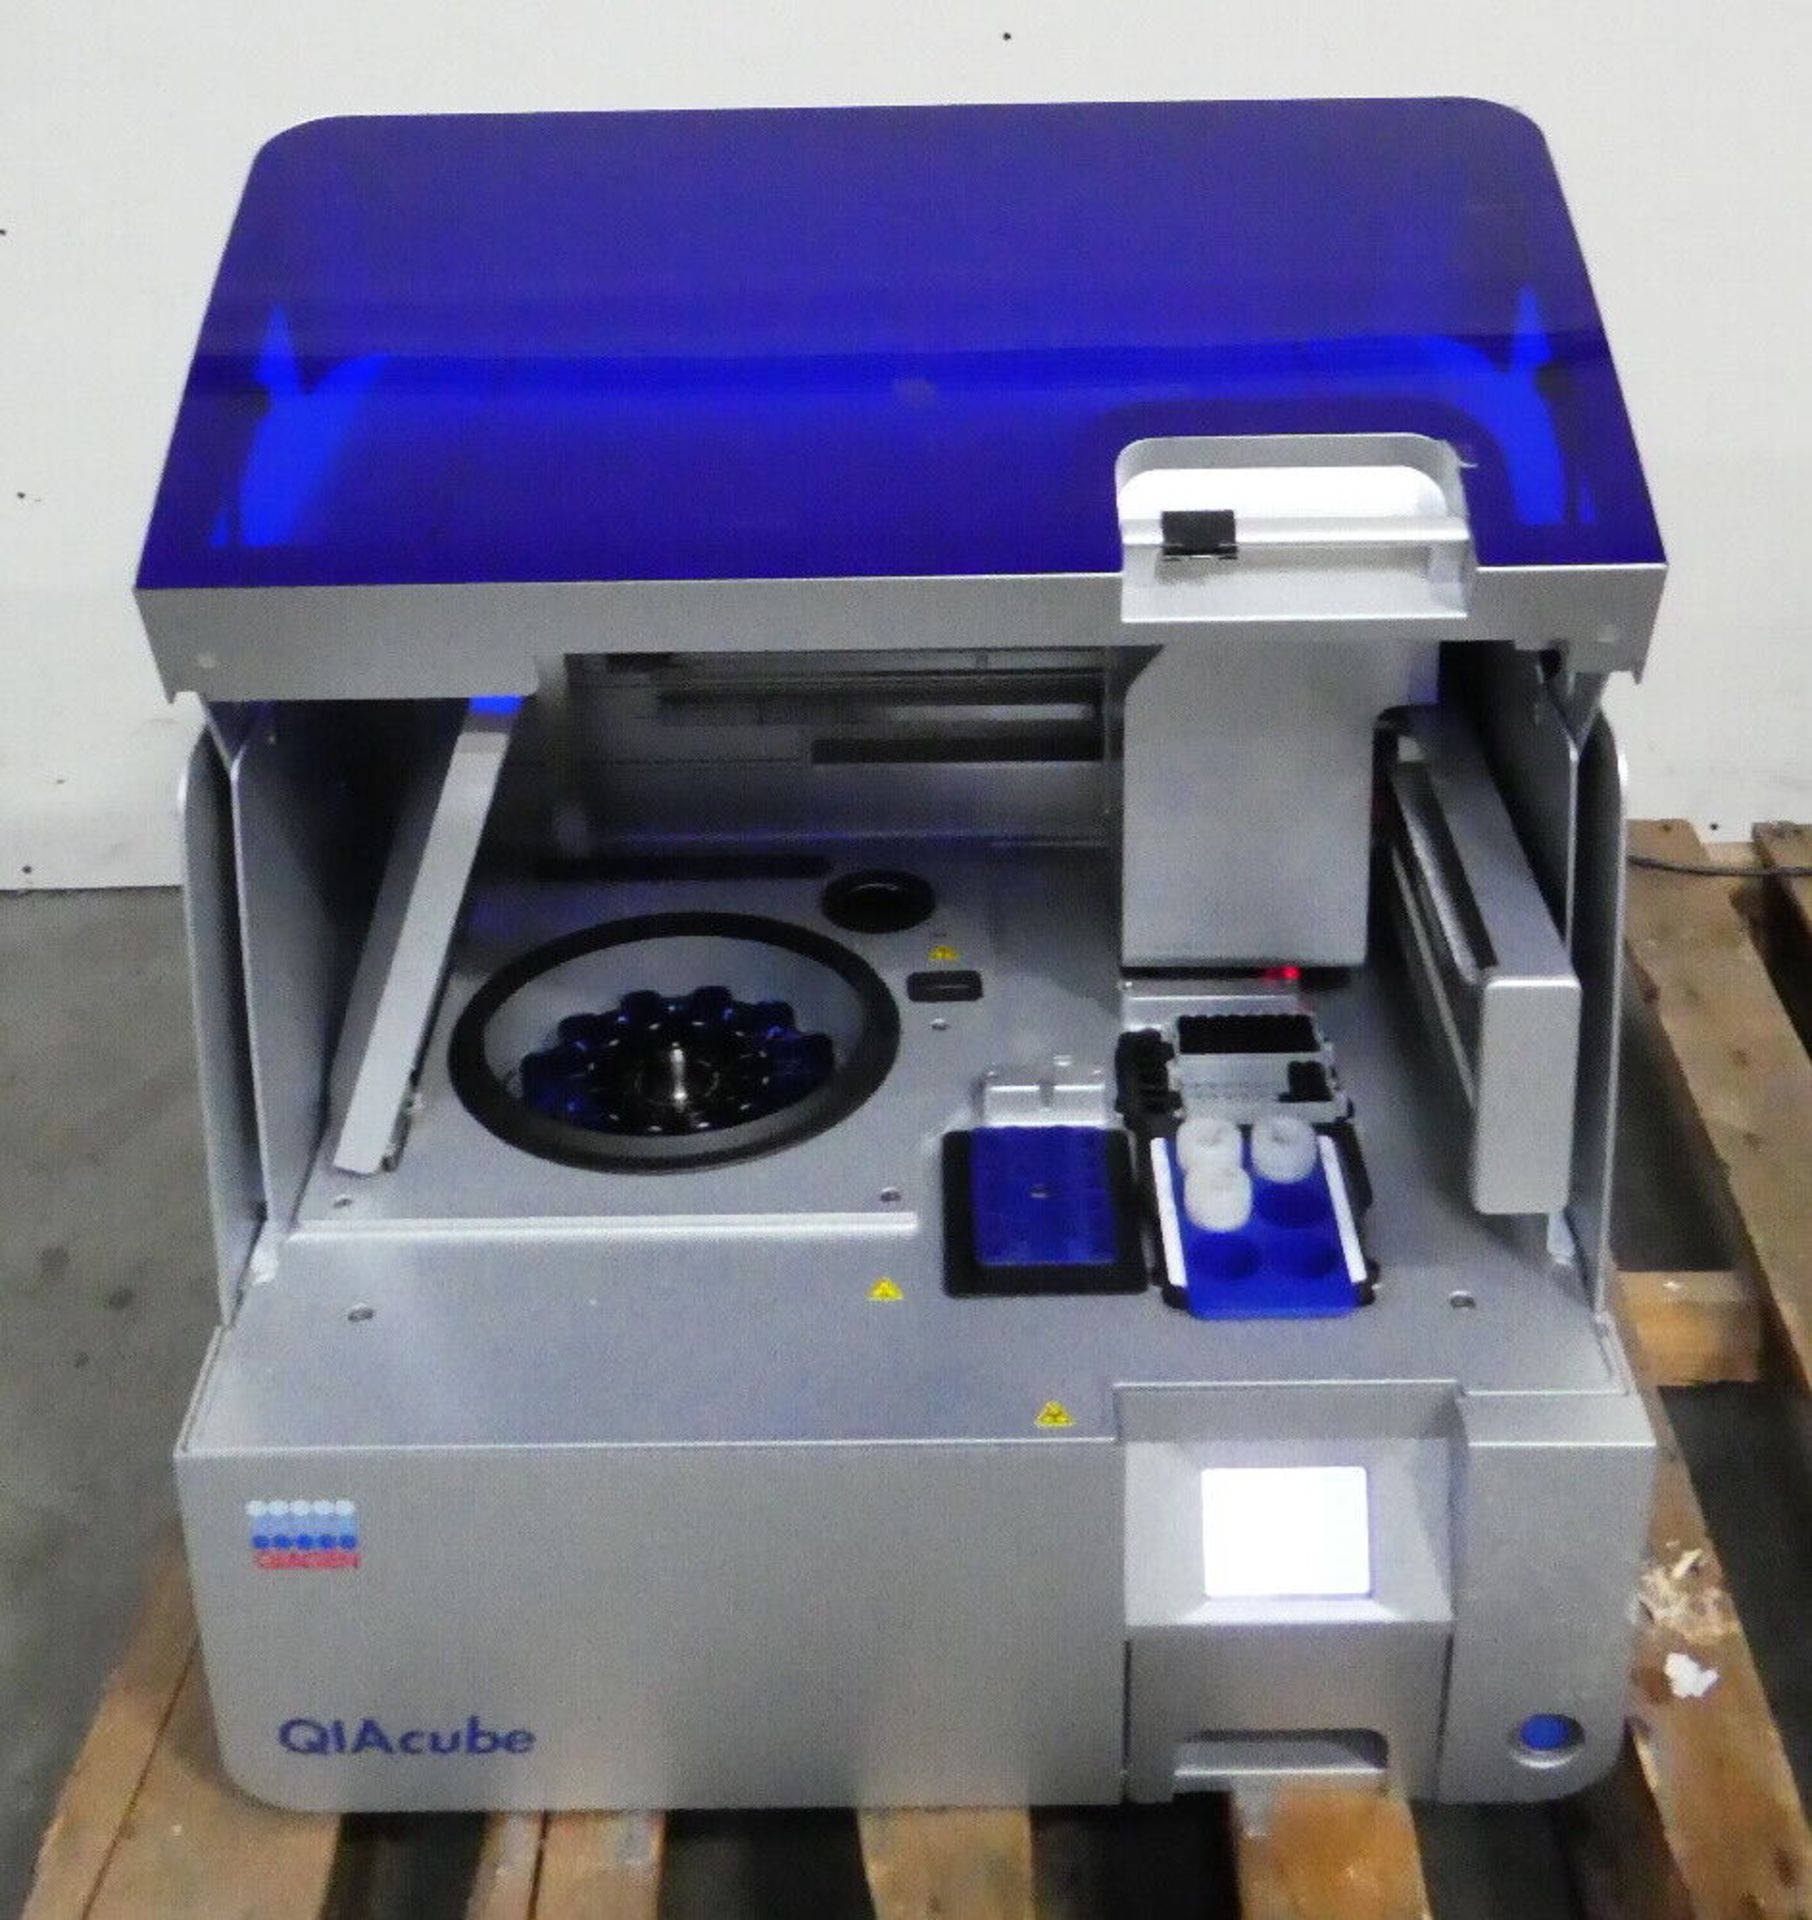 Qiagen QIAcube Automated DNA RNA Isolation Purification System